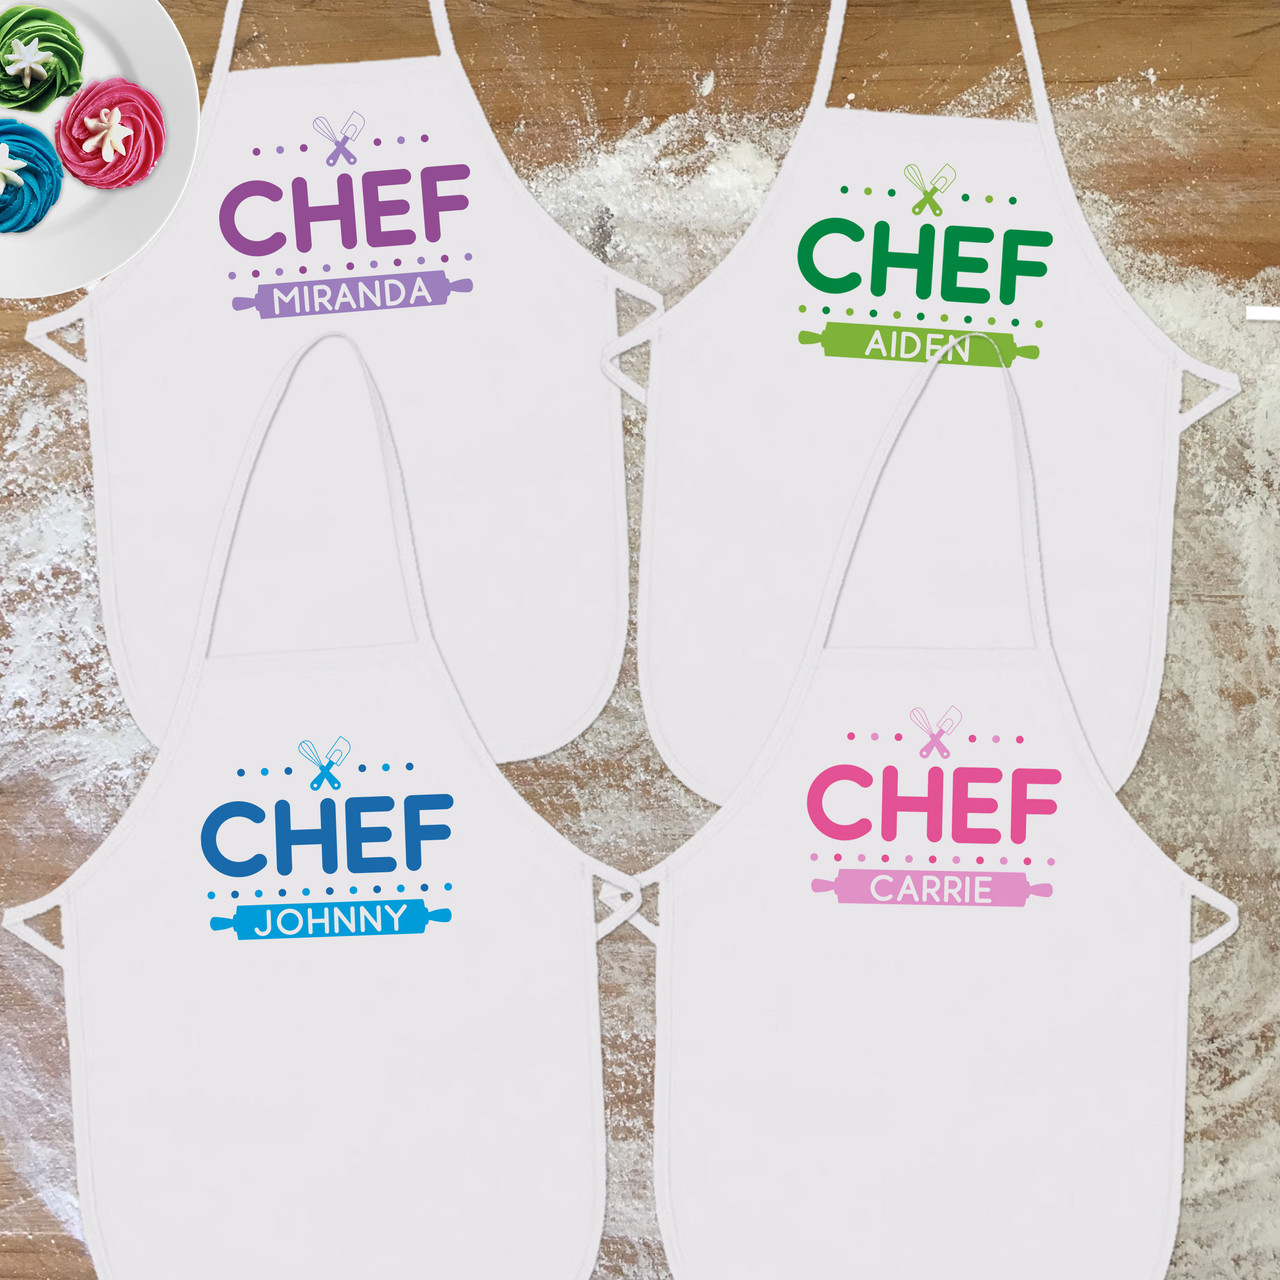 https://cdn11.bigcommerce.com/s-5grzuu6/images/stencil/1280w/products/5224/49818/Chef-Dots-Personalized_Kids-Aprons__76454.1663021301.jpg